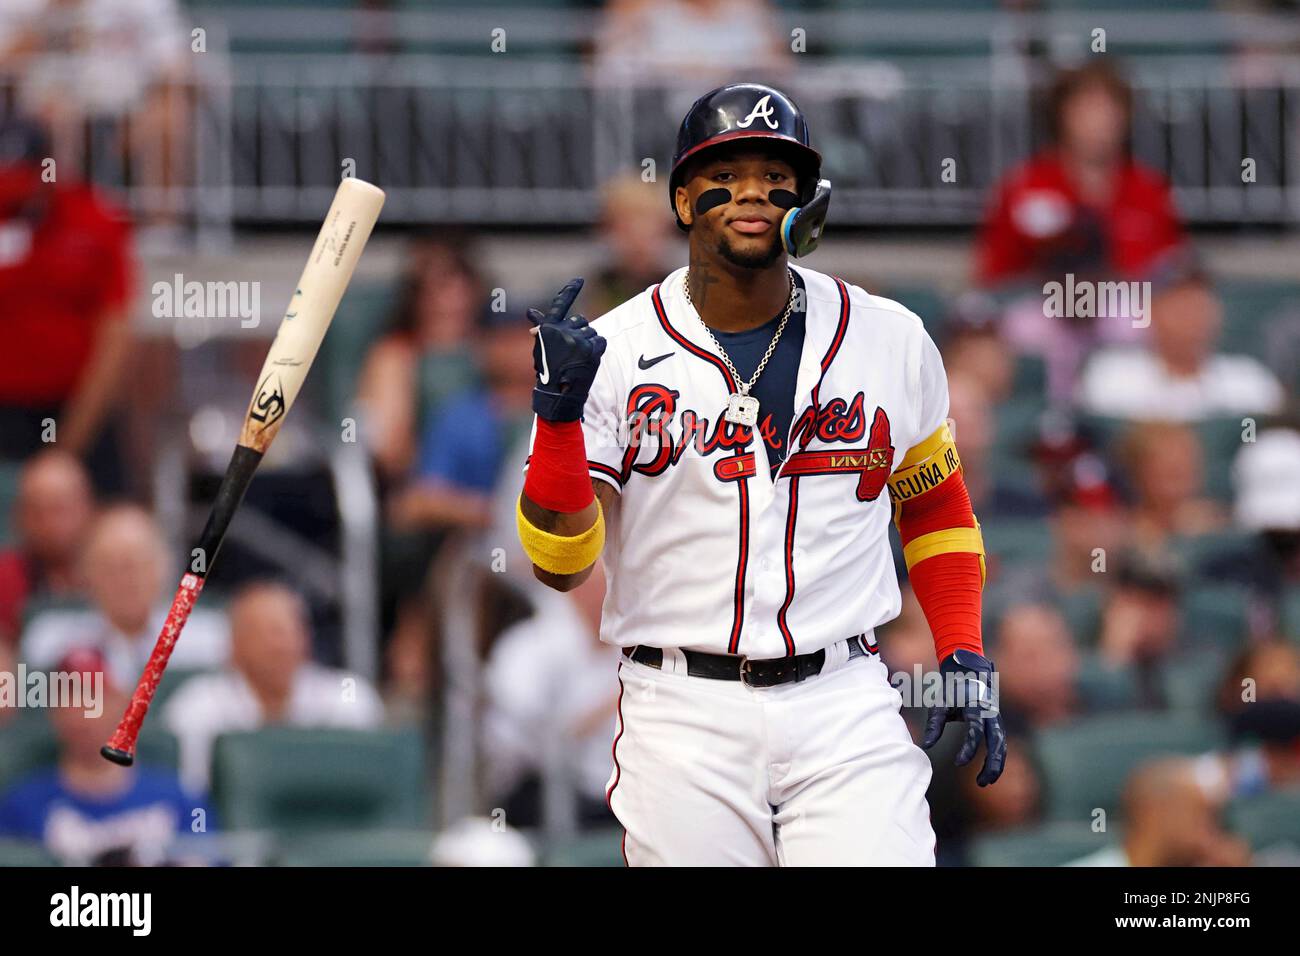 ATLANTA, GA - JULY 13: Atlanta Braves right fielder Ronald Acuna Jr. (13)  looks on during an MLB game against the New York Mets on July 13, 2022 at  Truist Park in